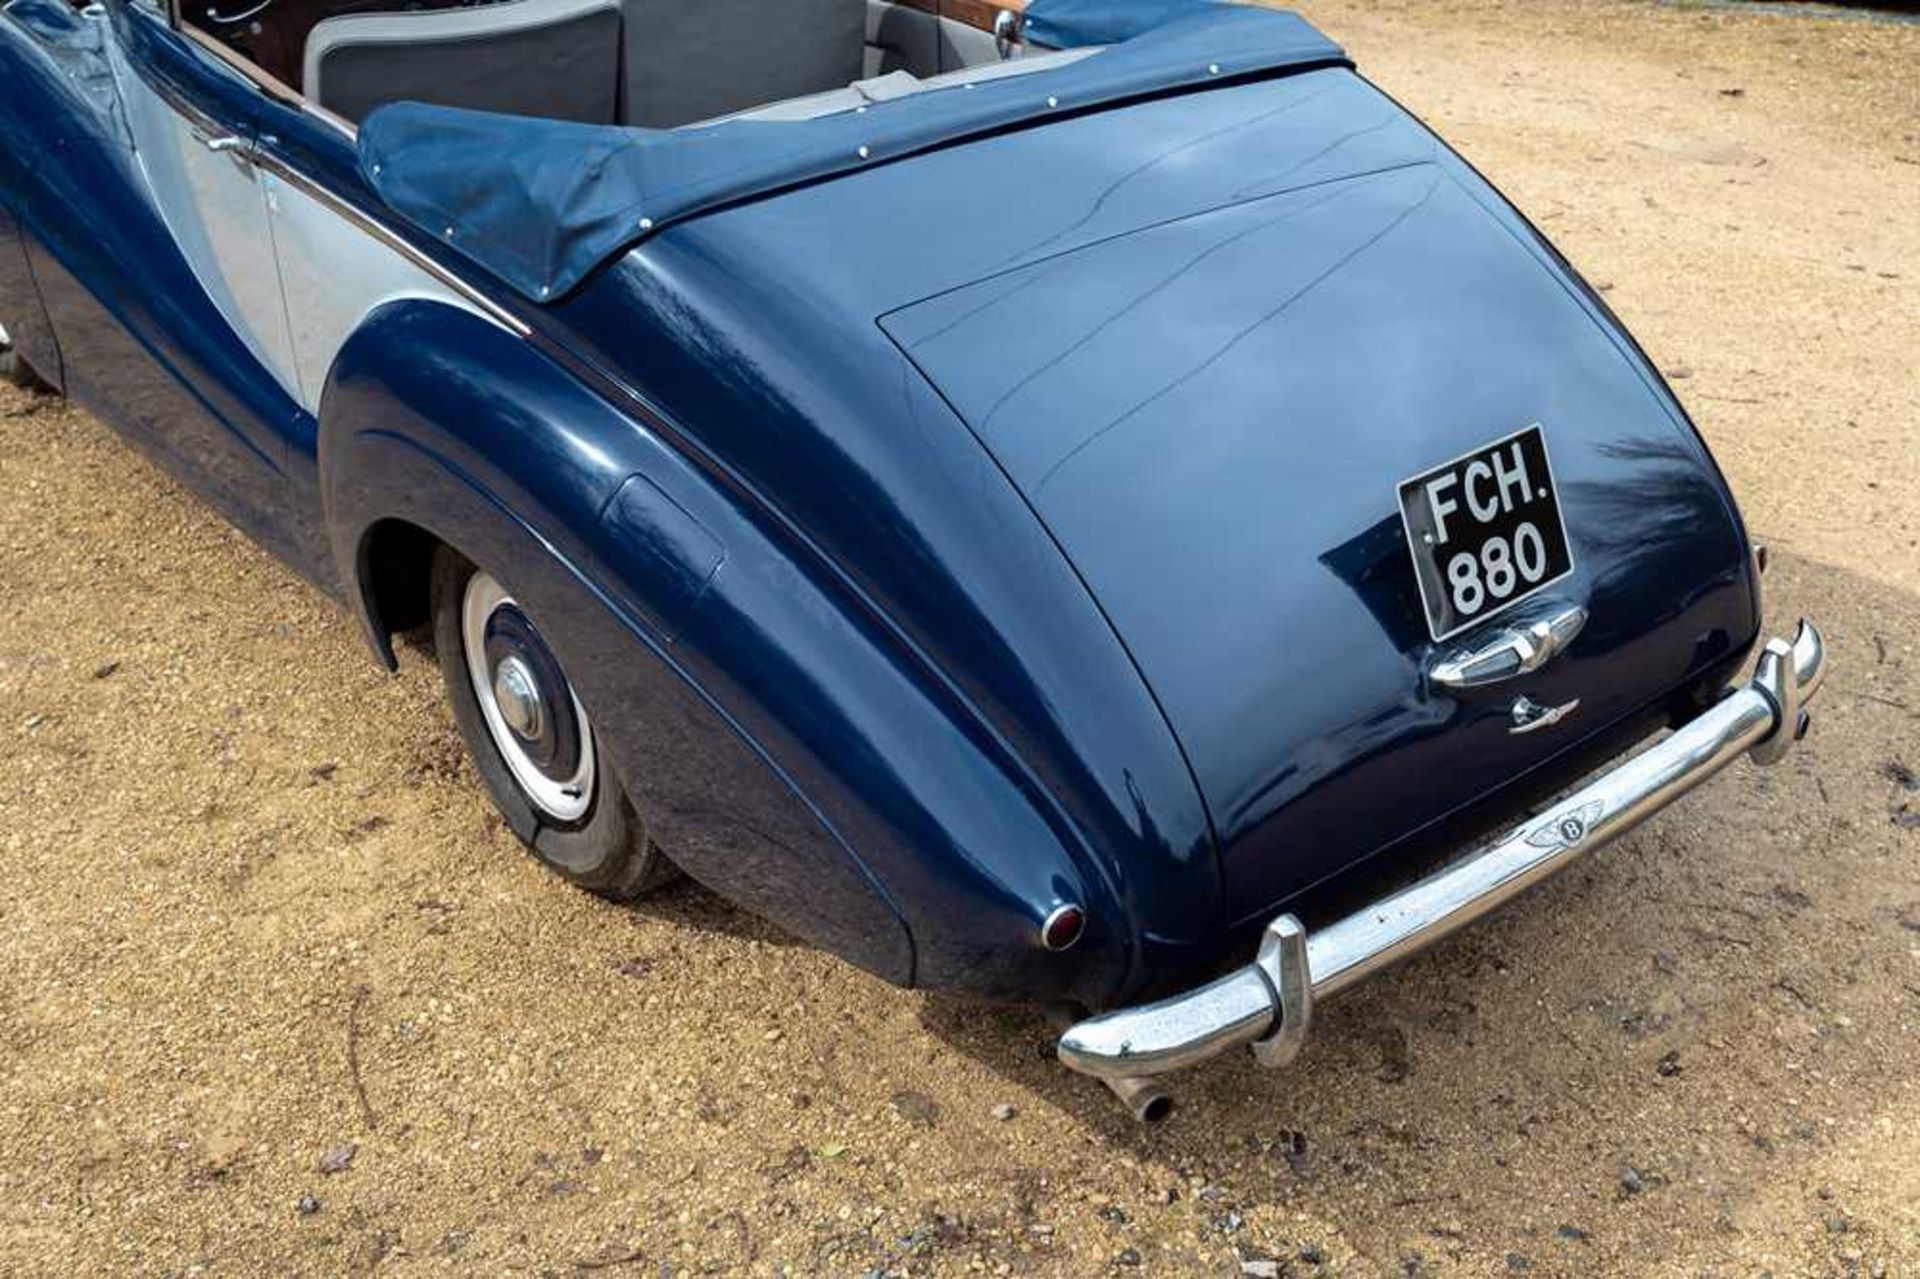 1954 Bentley R-Type Park Ward Drophead Coupe 1 of just 9 R-Type chassis clothed to Design 552 - Image 16 of 86